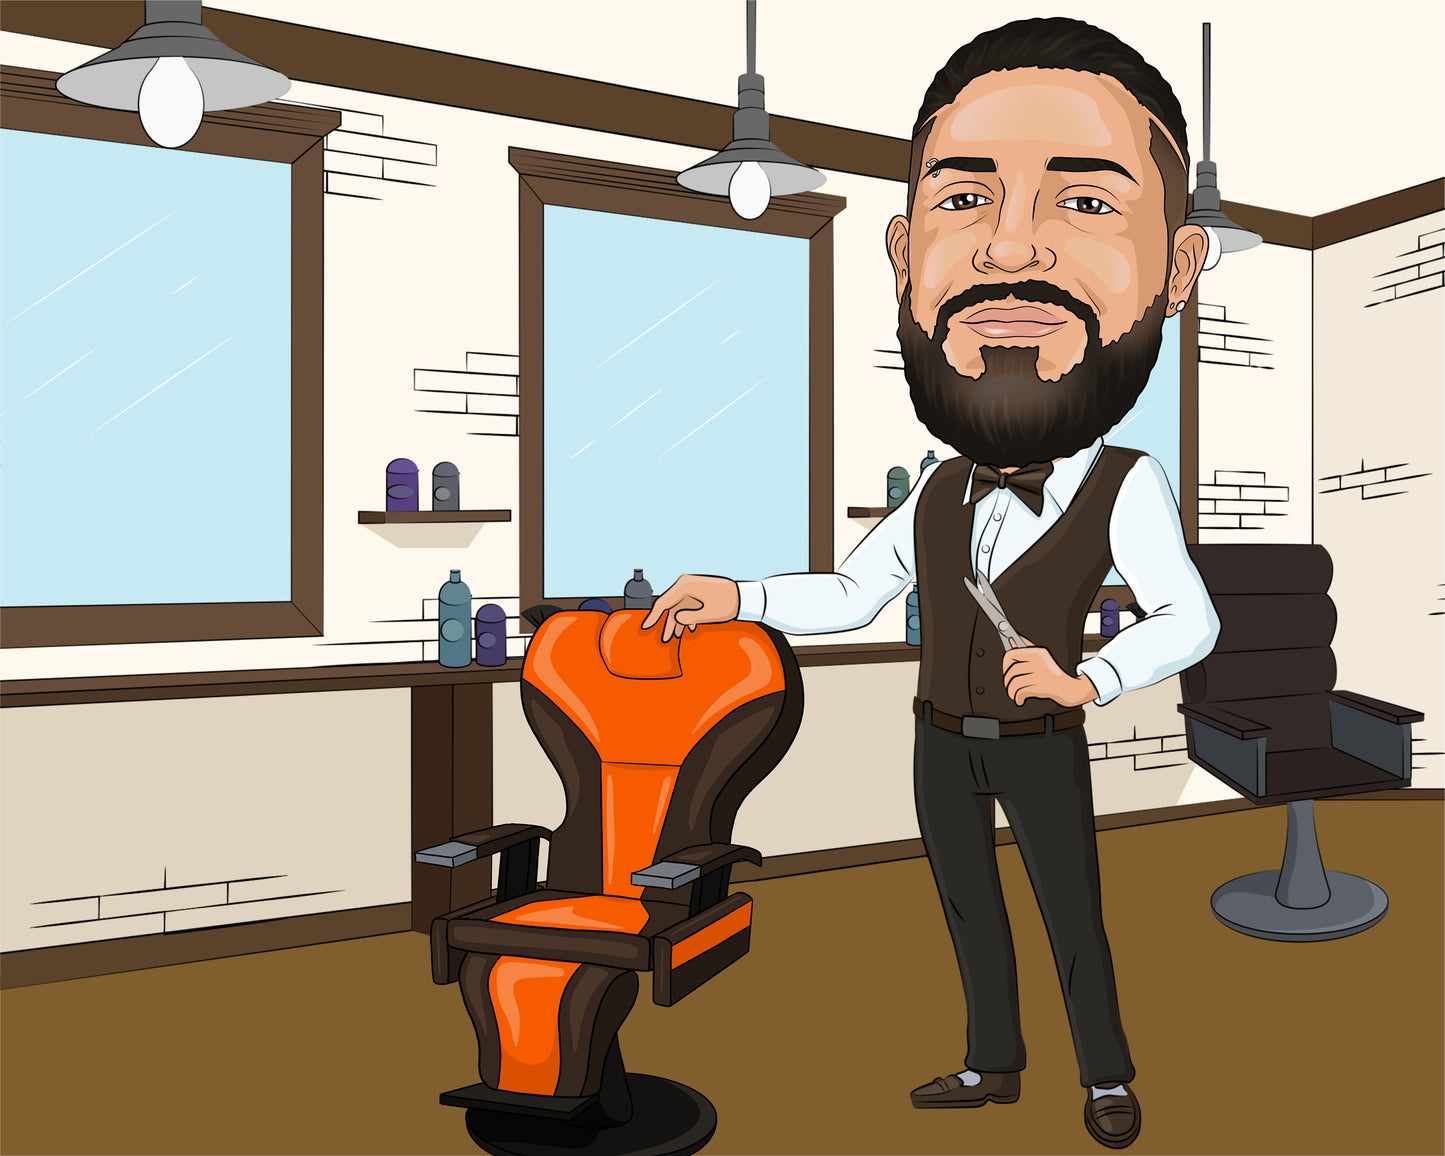 Barber Gift - Custom Caricature Portrait From Your Photo/barber shop gift